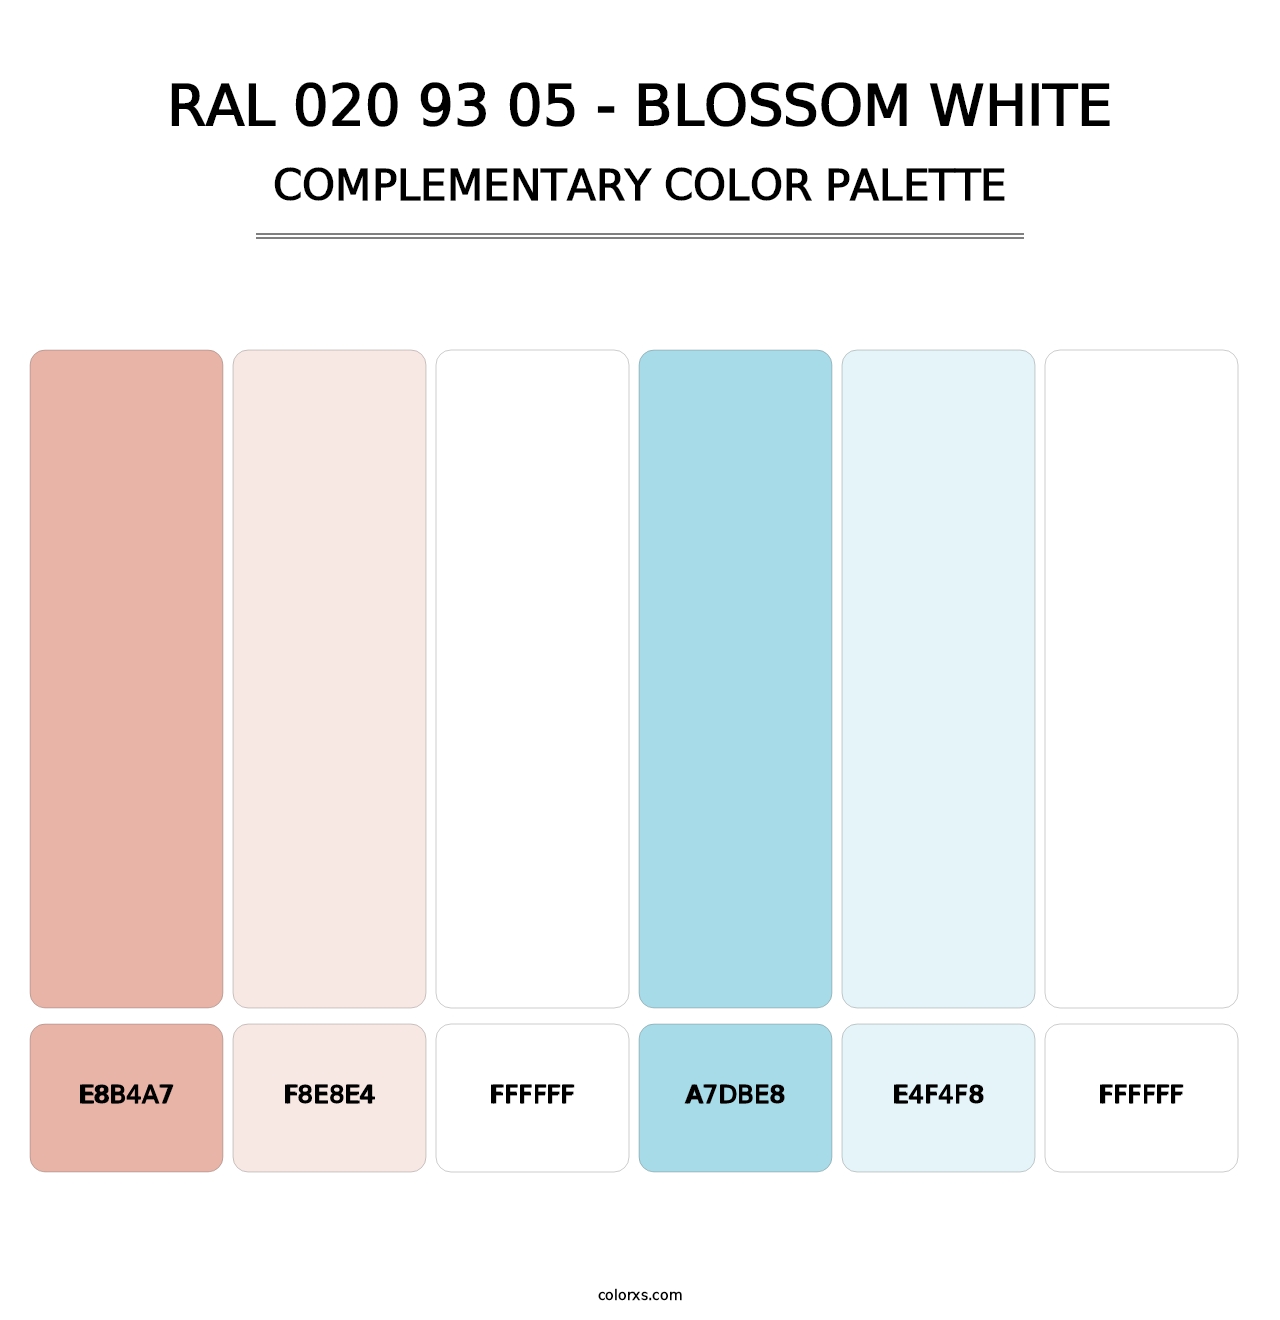 RAL 020 93 05 - Blossom White - Complementary Color Palette